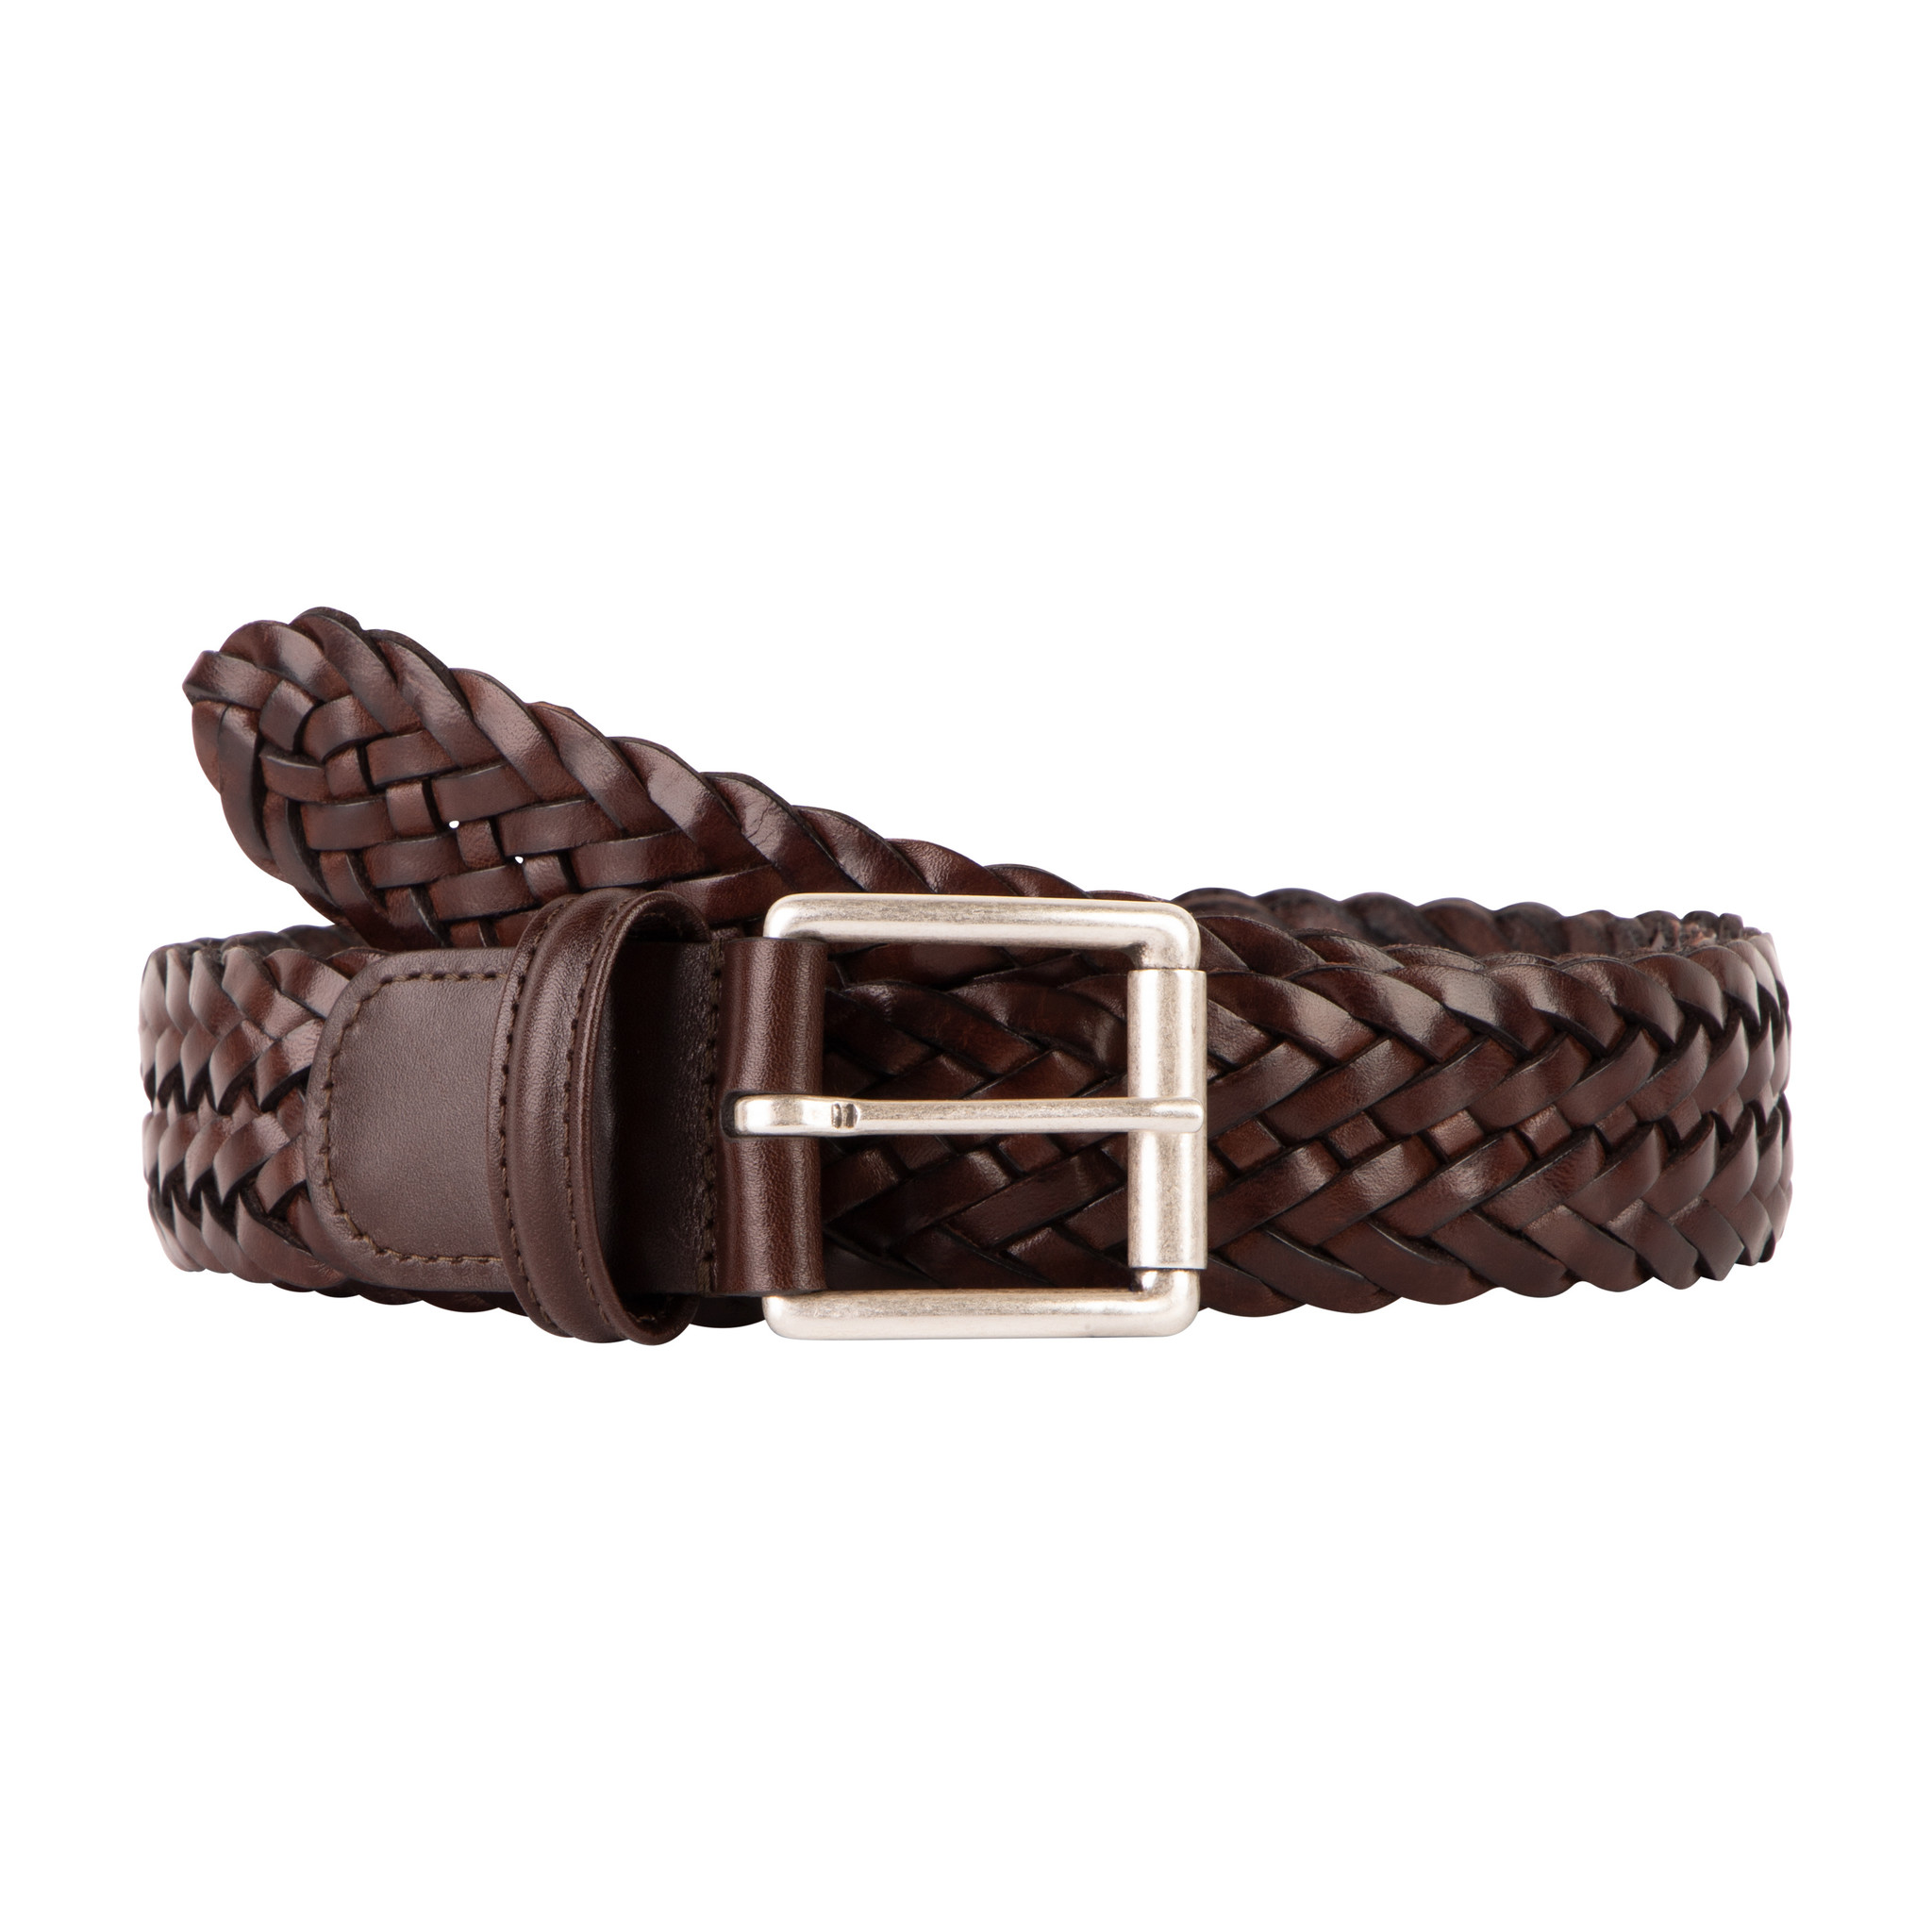 Anderson's Grained Western Leather Belt 2,5 cm Dark Brown at